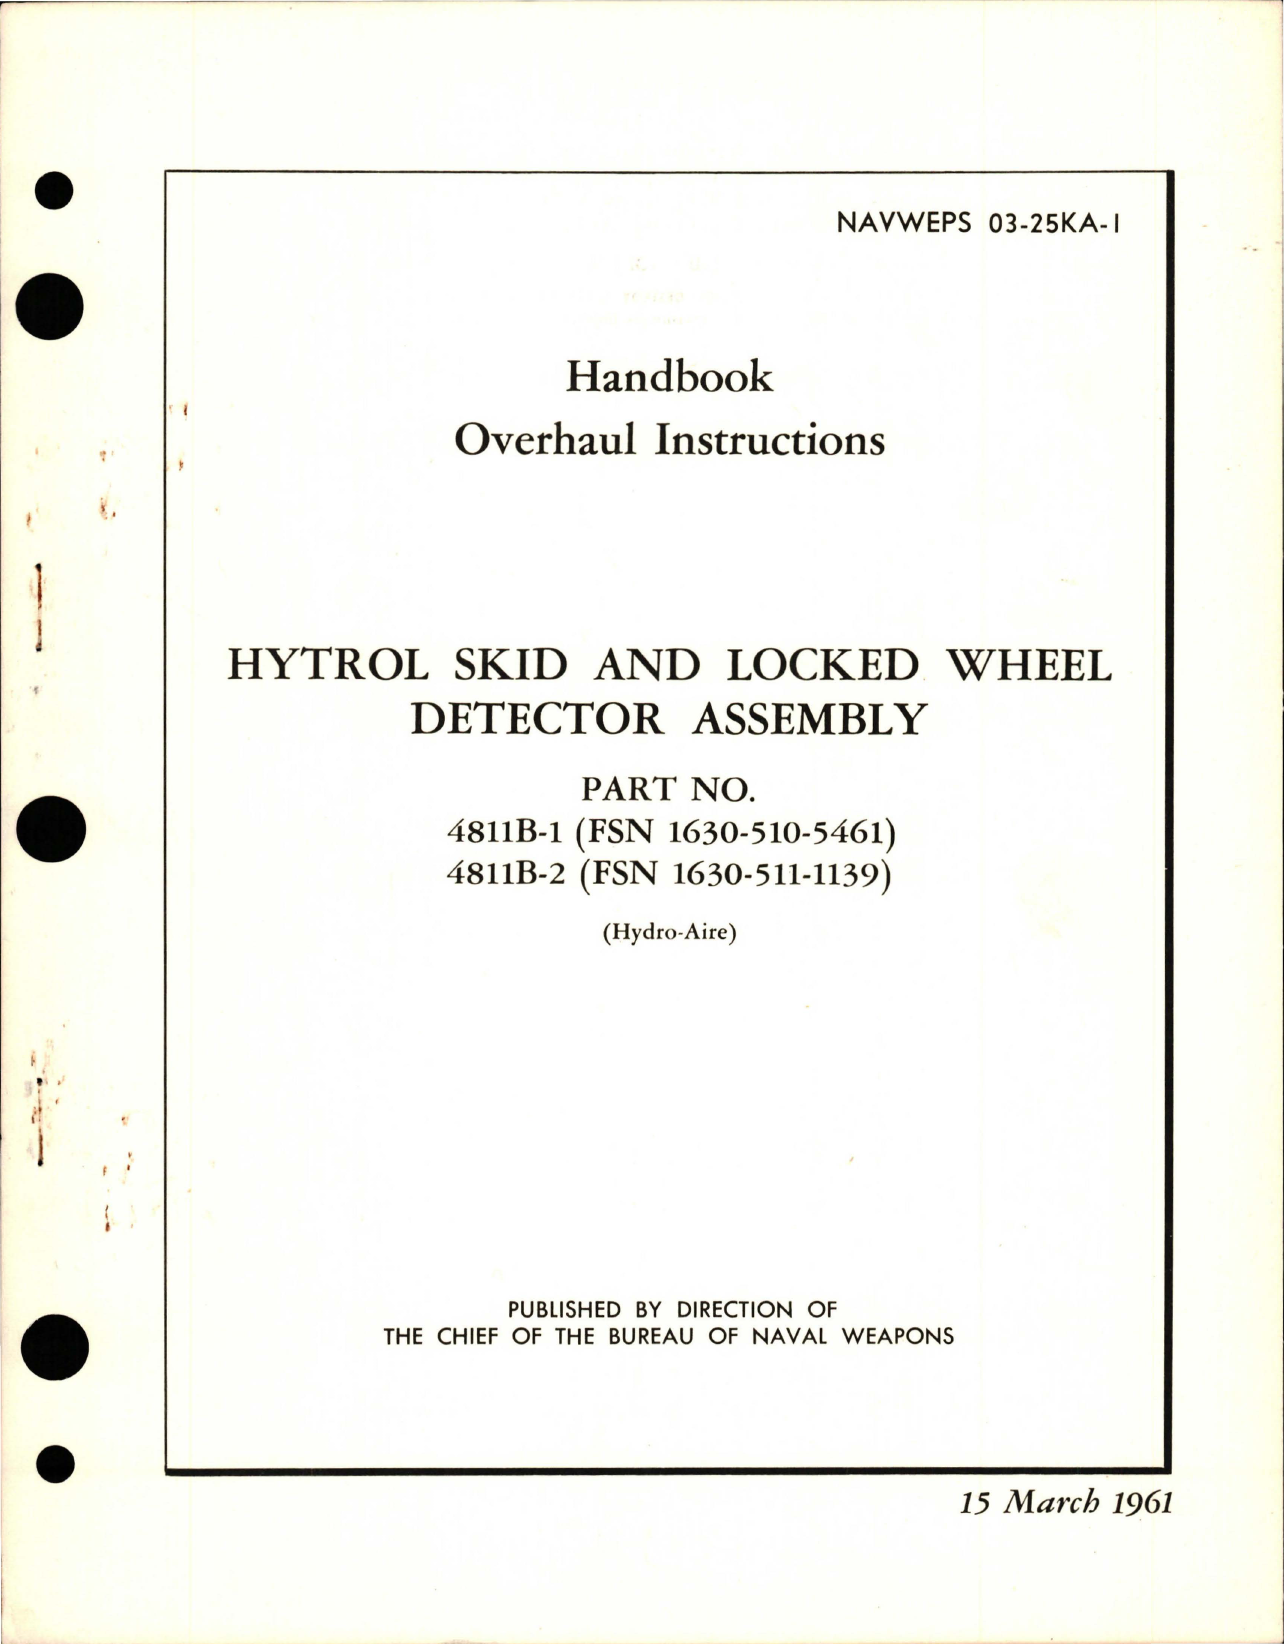 Sample page 1 from AirCorps Library document: Overhaul Instructions for Hytrol Skid and Locked Wheel Detector Assembly - Parts 4811B-1 and 4811B-2 